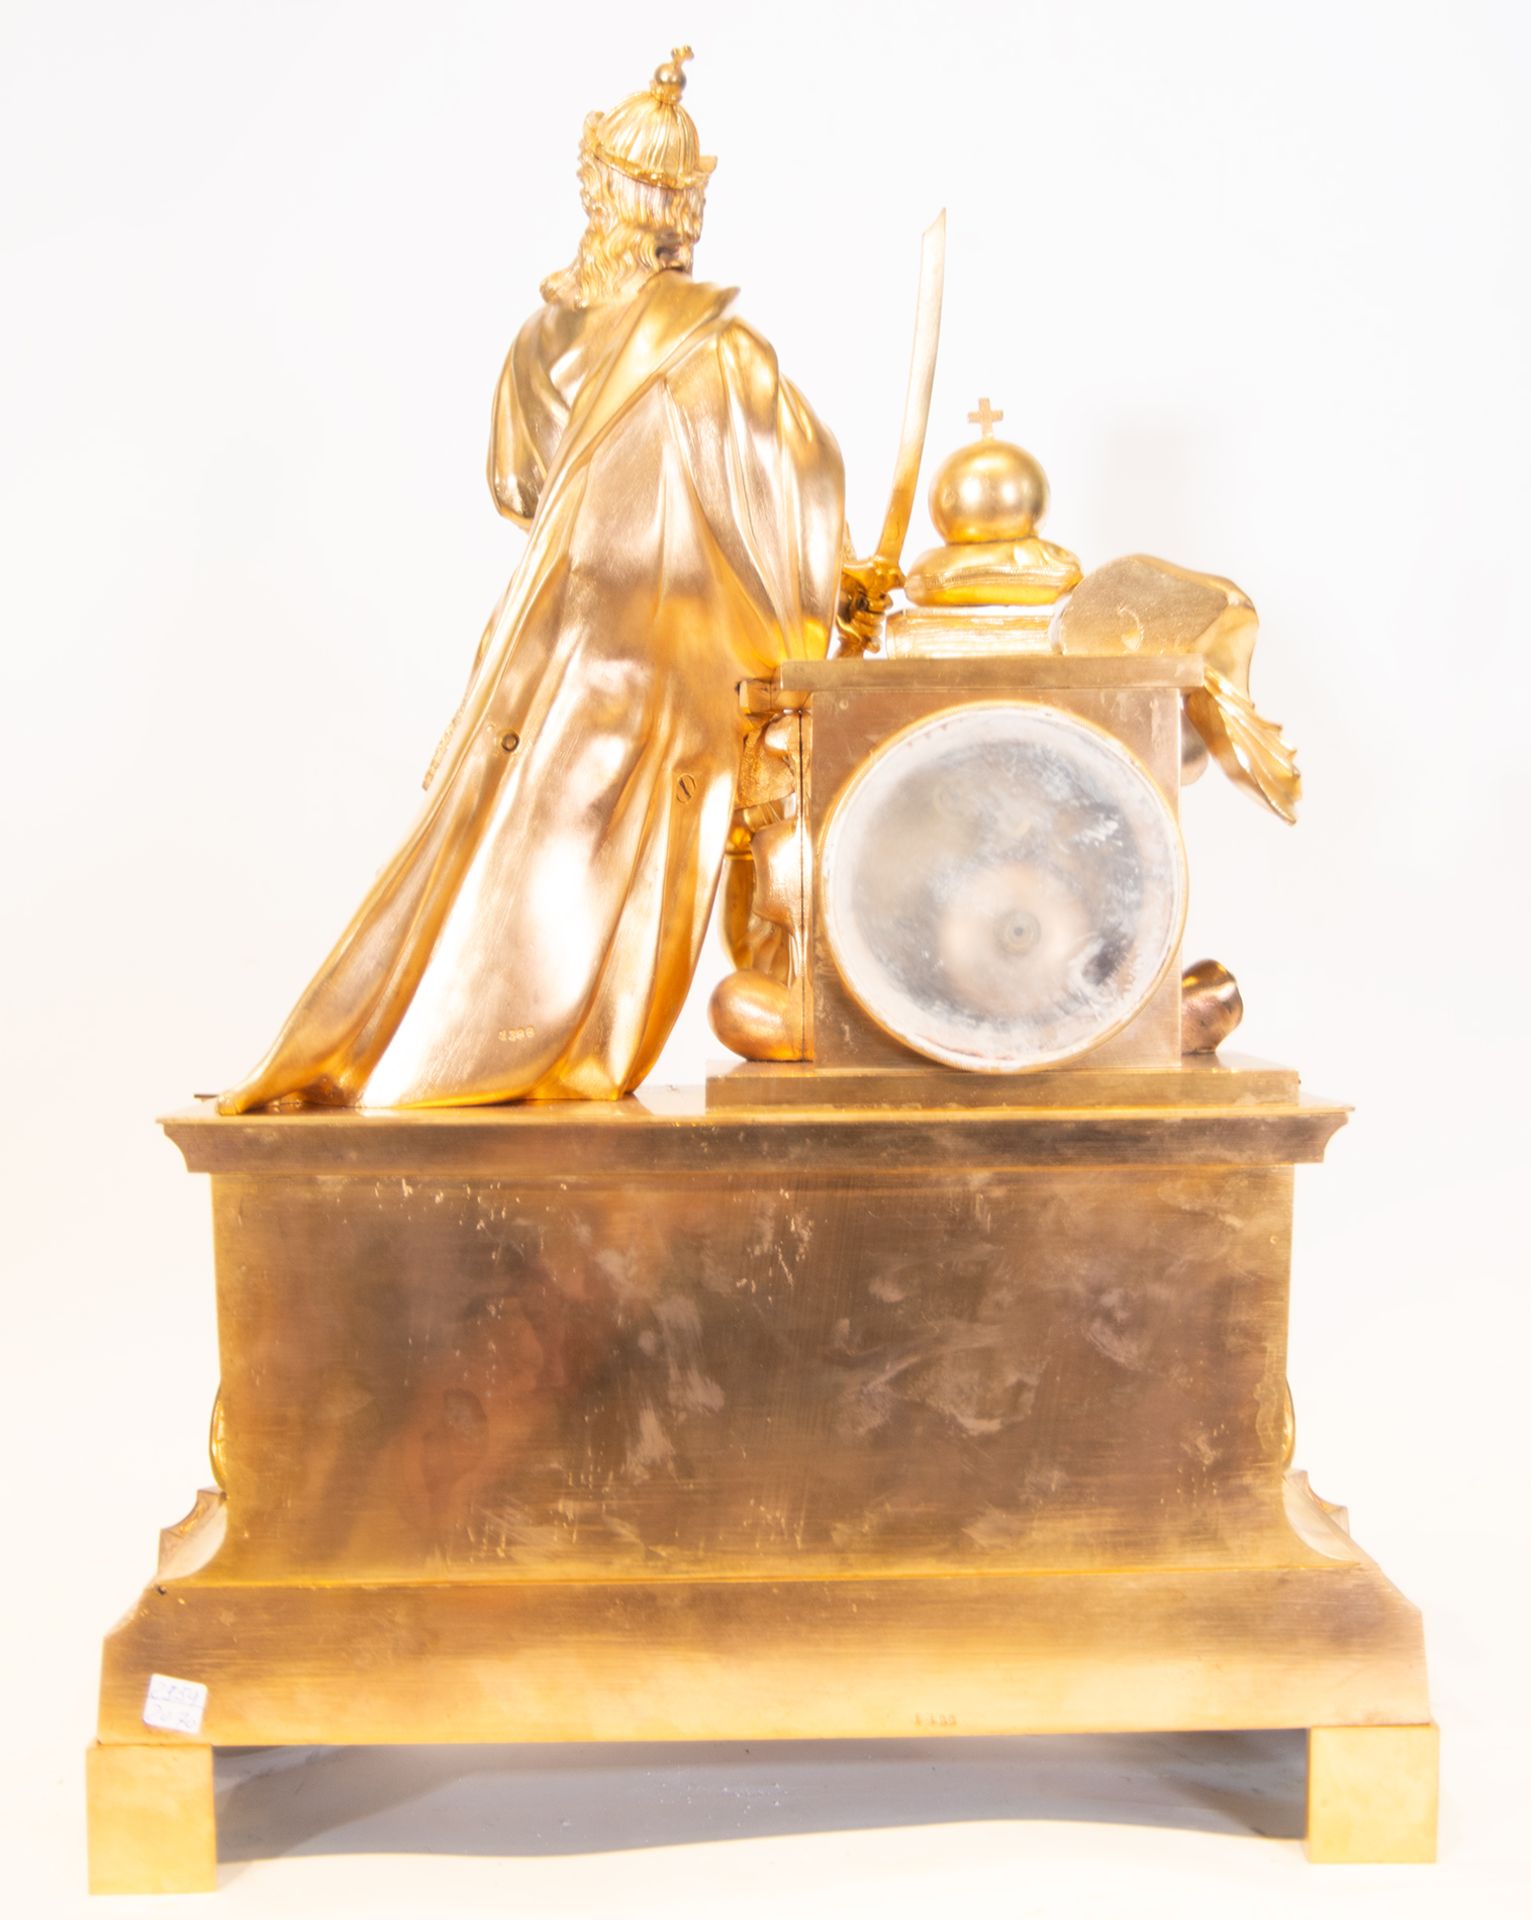 Gilt bronze clock depicting the Emperor Charlemagne, 19th century French school - Image 7 of 8